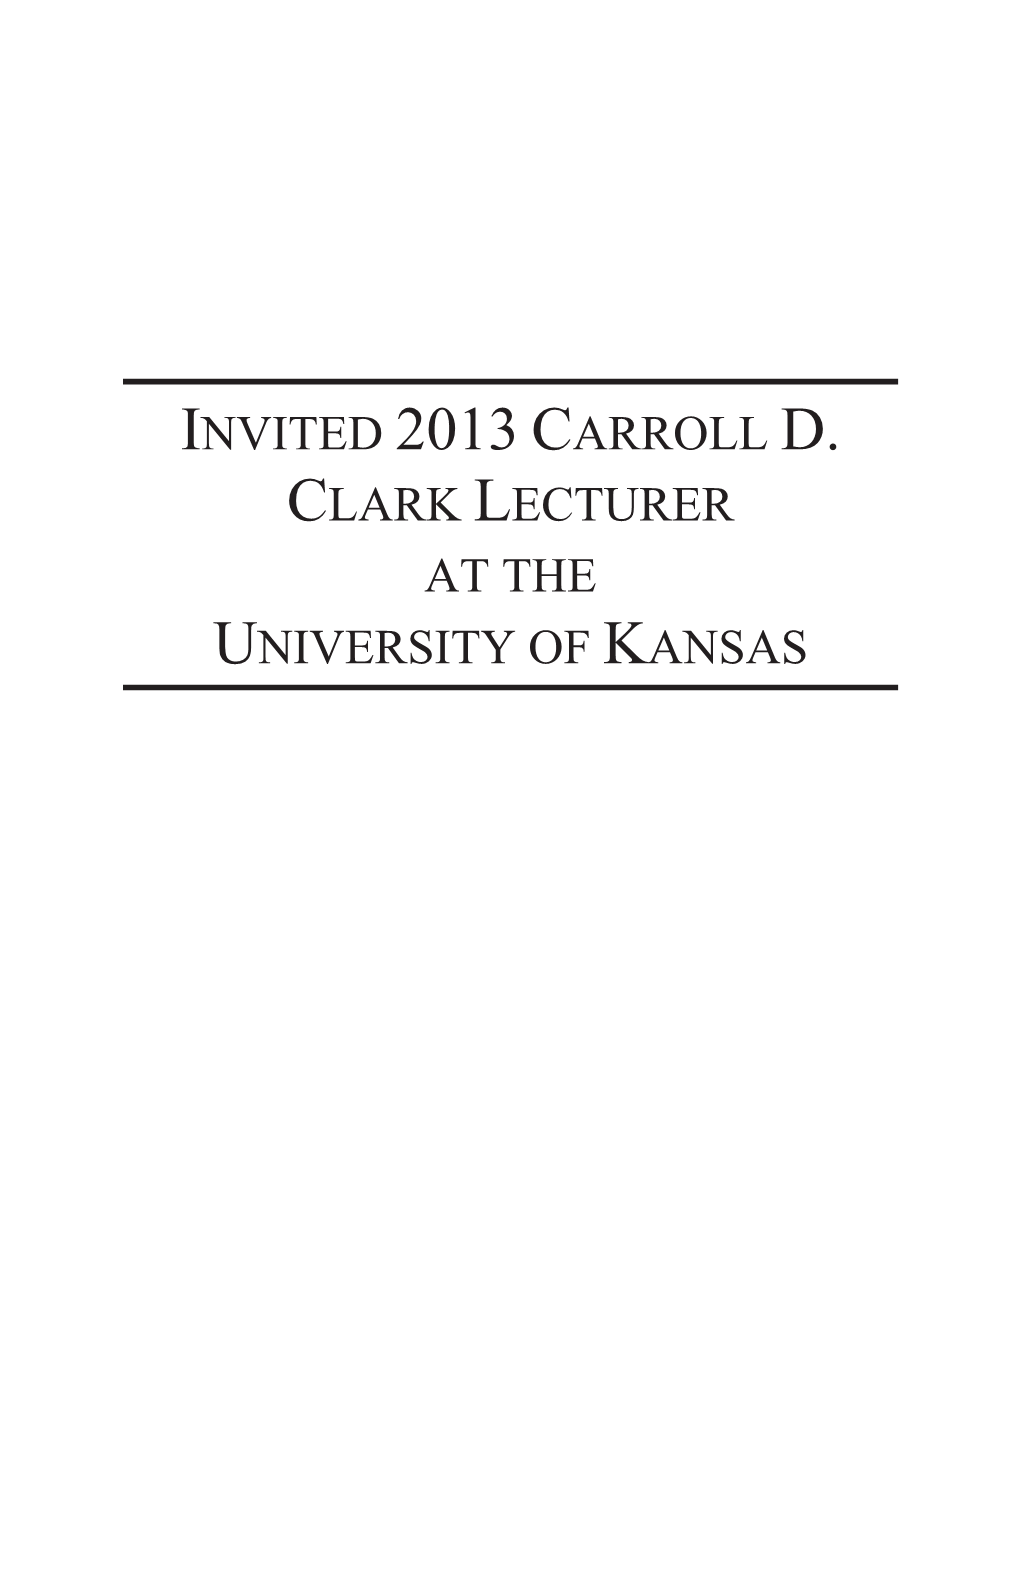 Invited 2013 Carroll D. Clark Lecturer at the University of Kansas